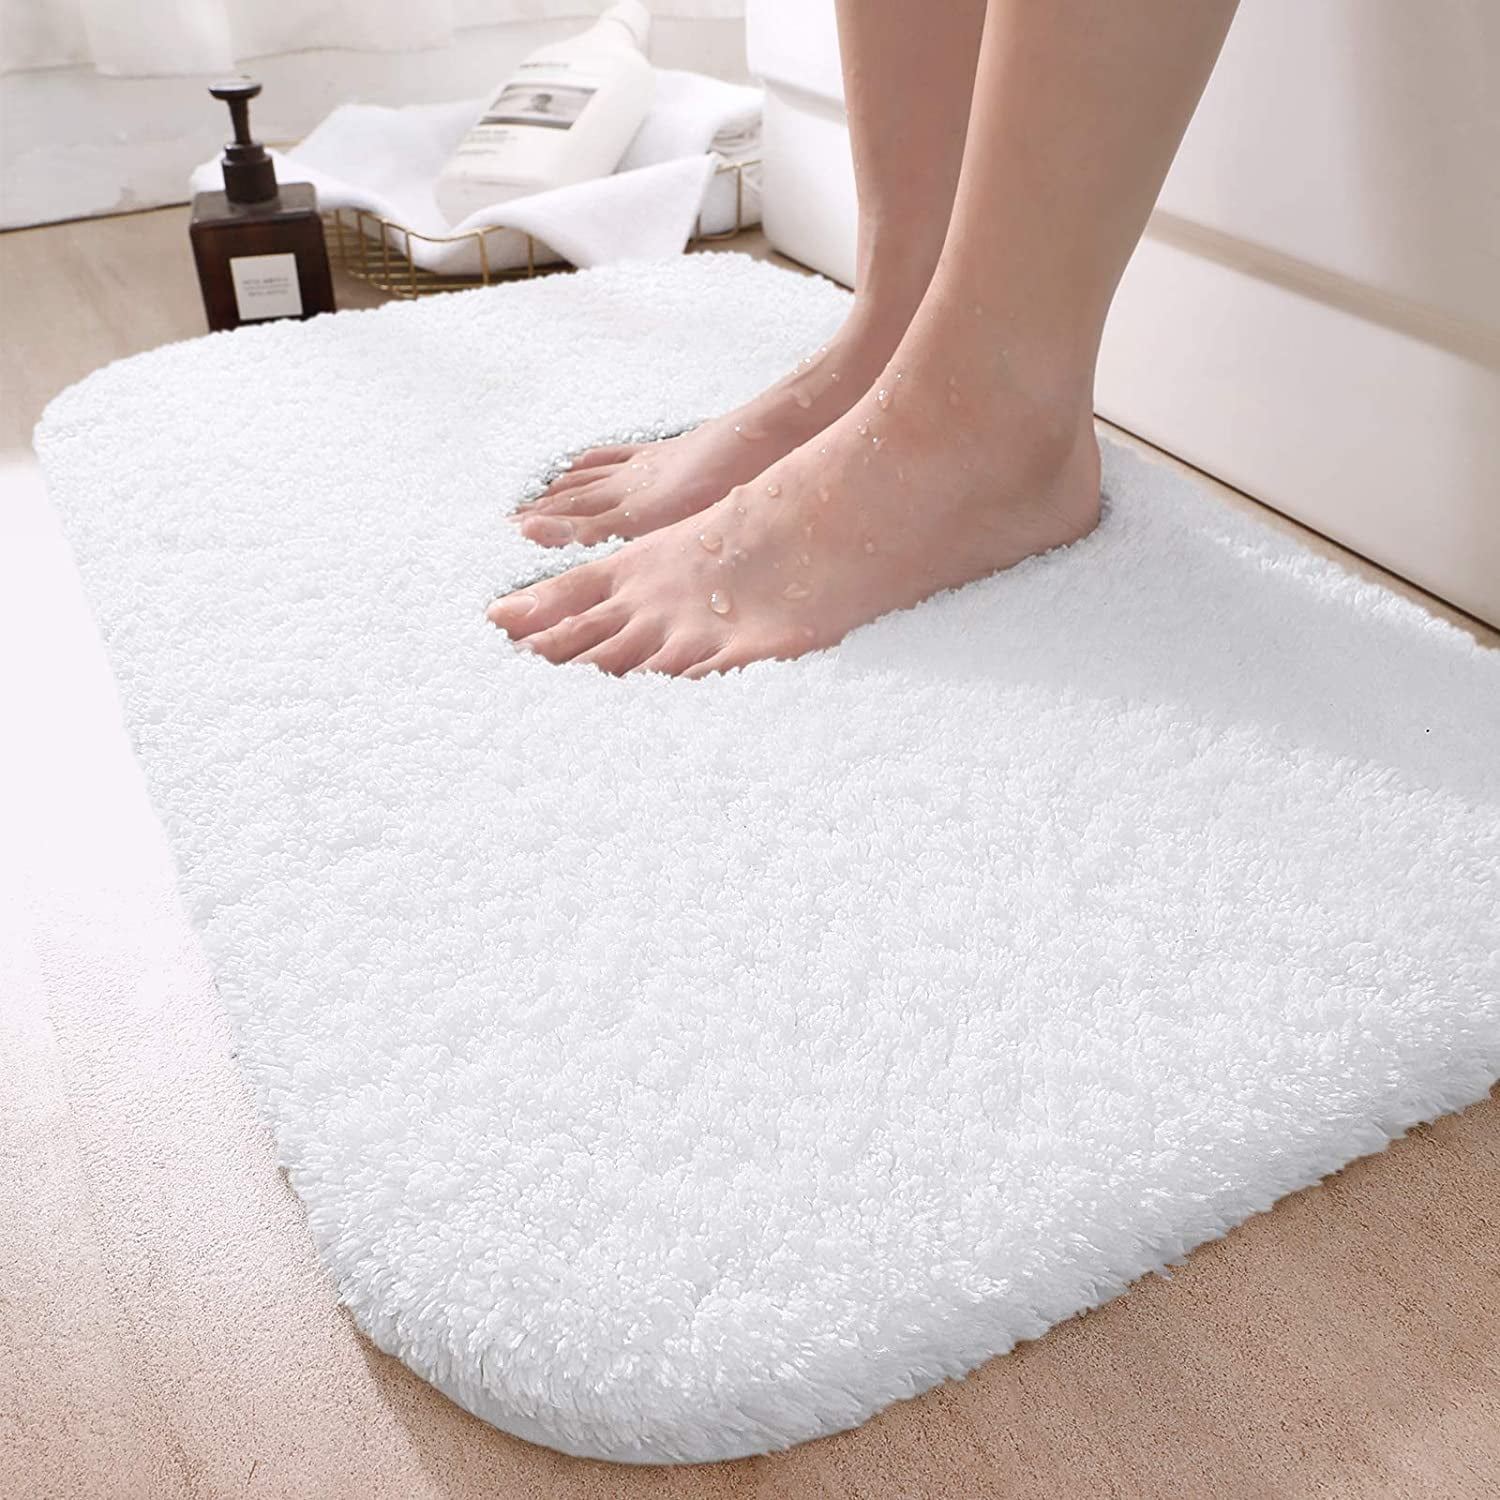 OEAKAY Bath Mat Bathroom Rug Absorbent Non-Slip Washable Shower Floor Mats  Small Carpet 24x43,Turquoise Teal and White